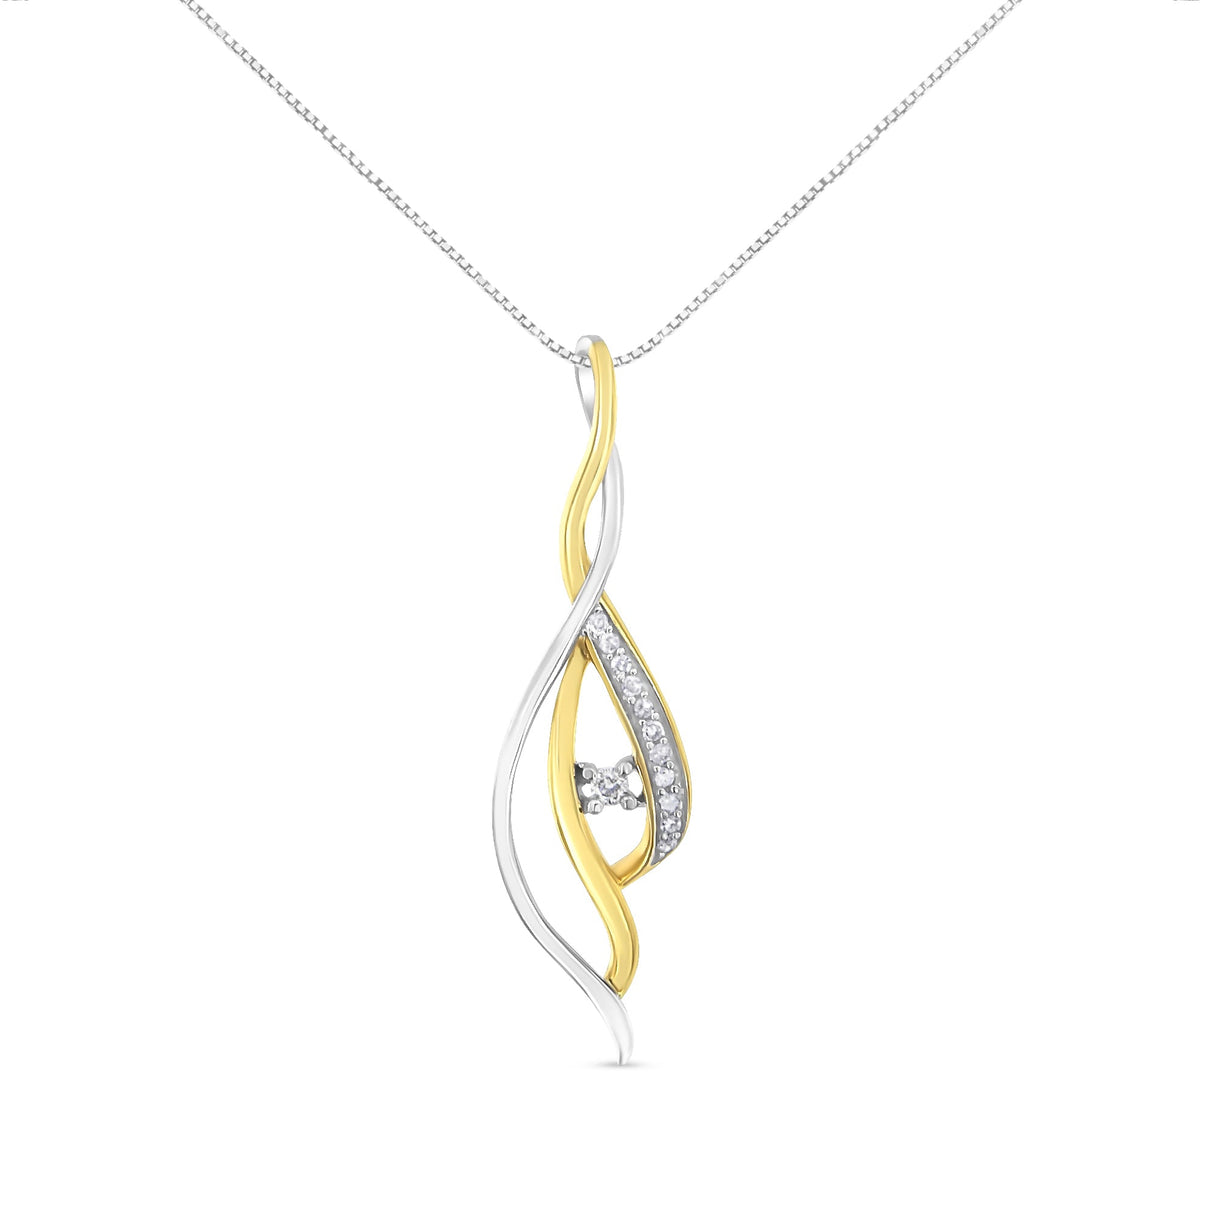 10K Yellow And White Gold Round Cut Diamond Accent Cascade 18" Pendant Necklace (J-K Color, I2-I3 Clarity) - Tuesday Morning-Pendant Necklace